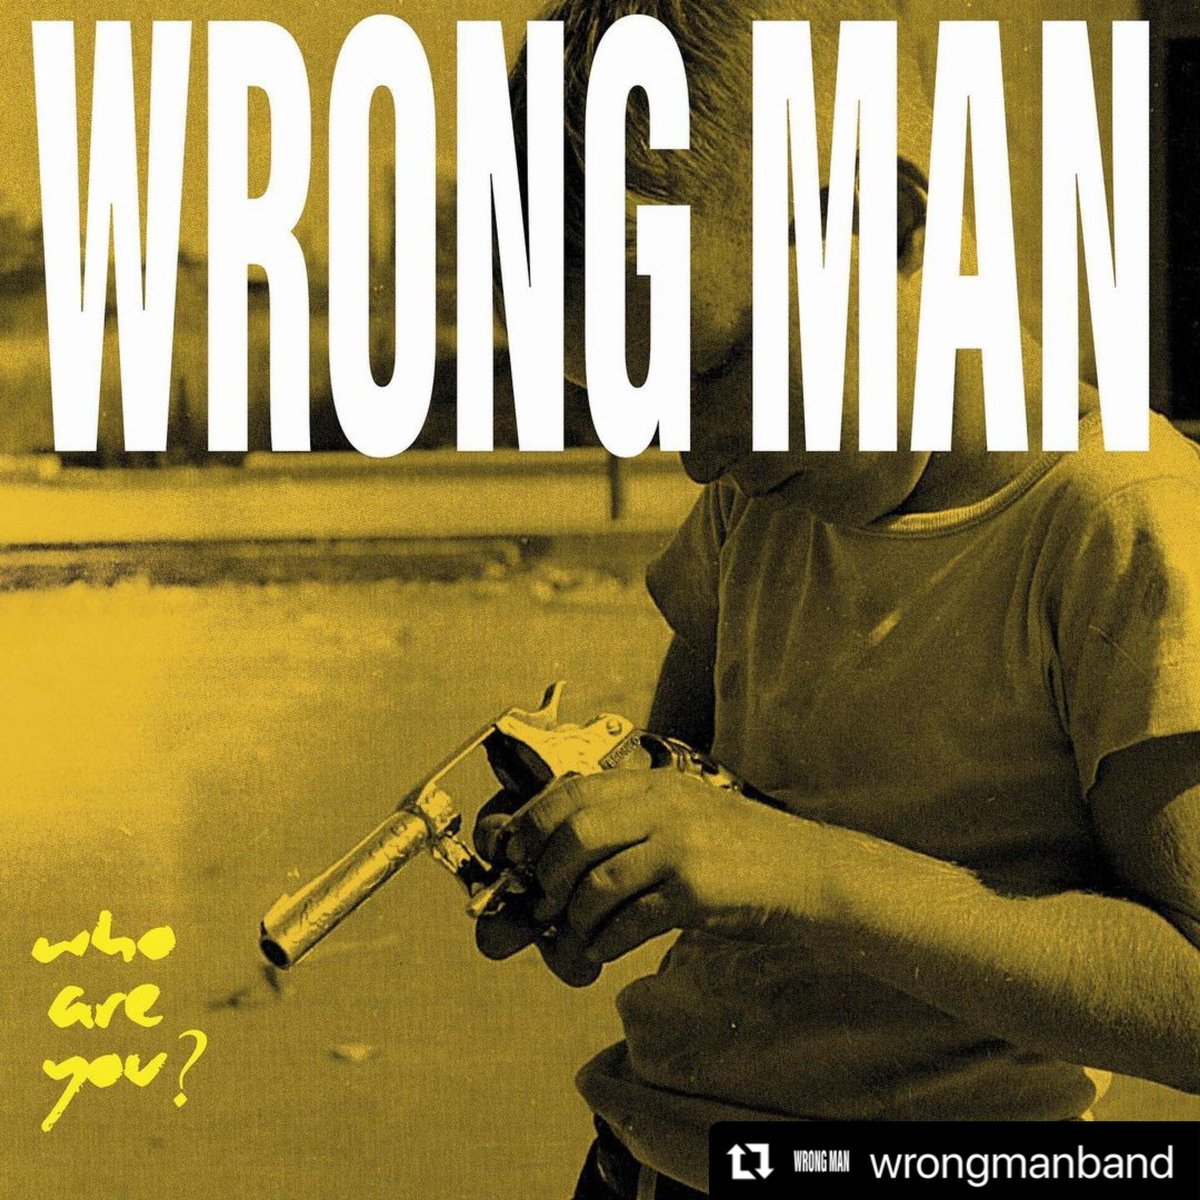 Wrong Man - “Who Are You?” Our debut EP offers 4 tracks of high energy, guitar driven post hardcore / alt rock, inspired by everything from 70s proto punk to large chunks of the Dischord and Touch & Go . Presales go up 12/14/22 music.youtube.com/watch?v=6KiJcQ…